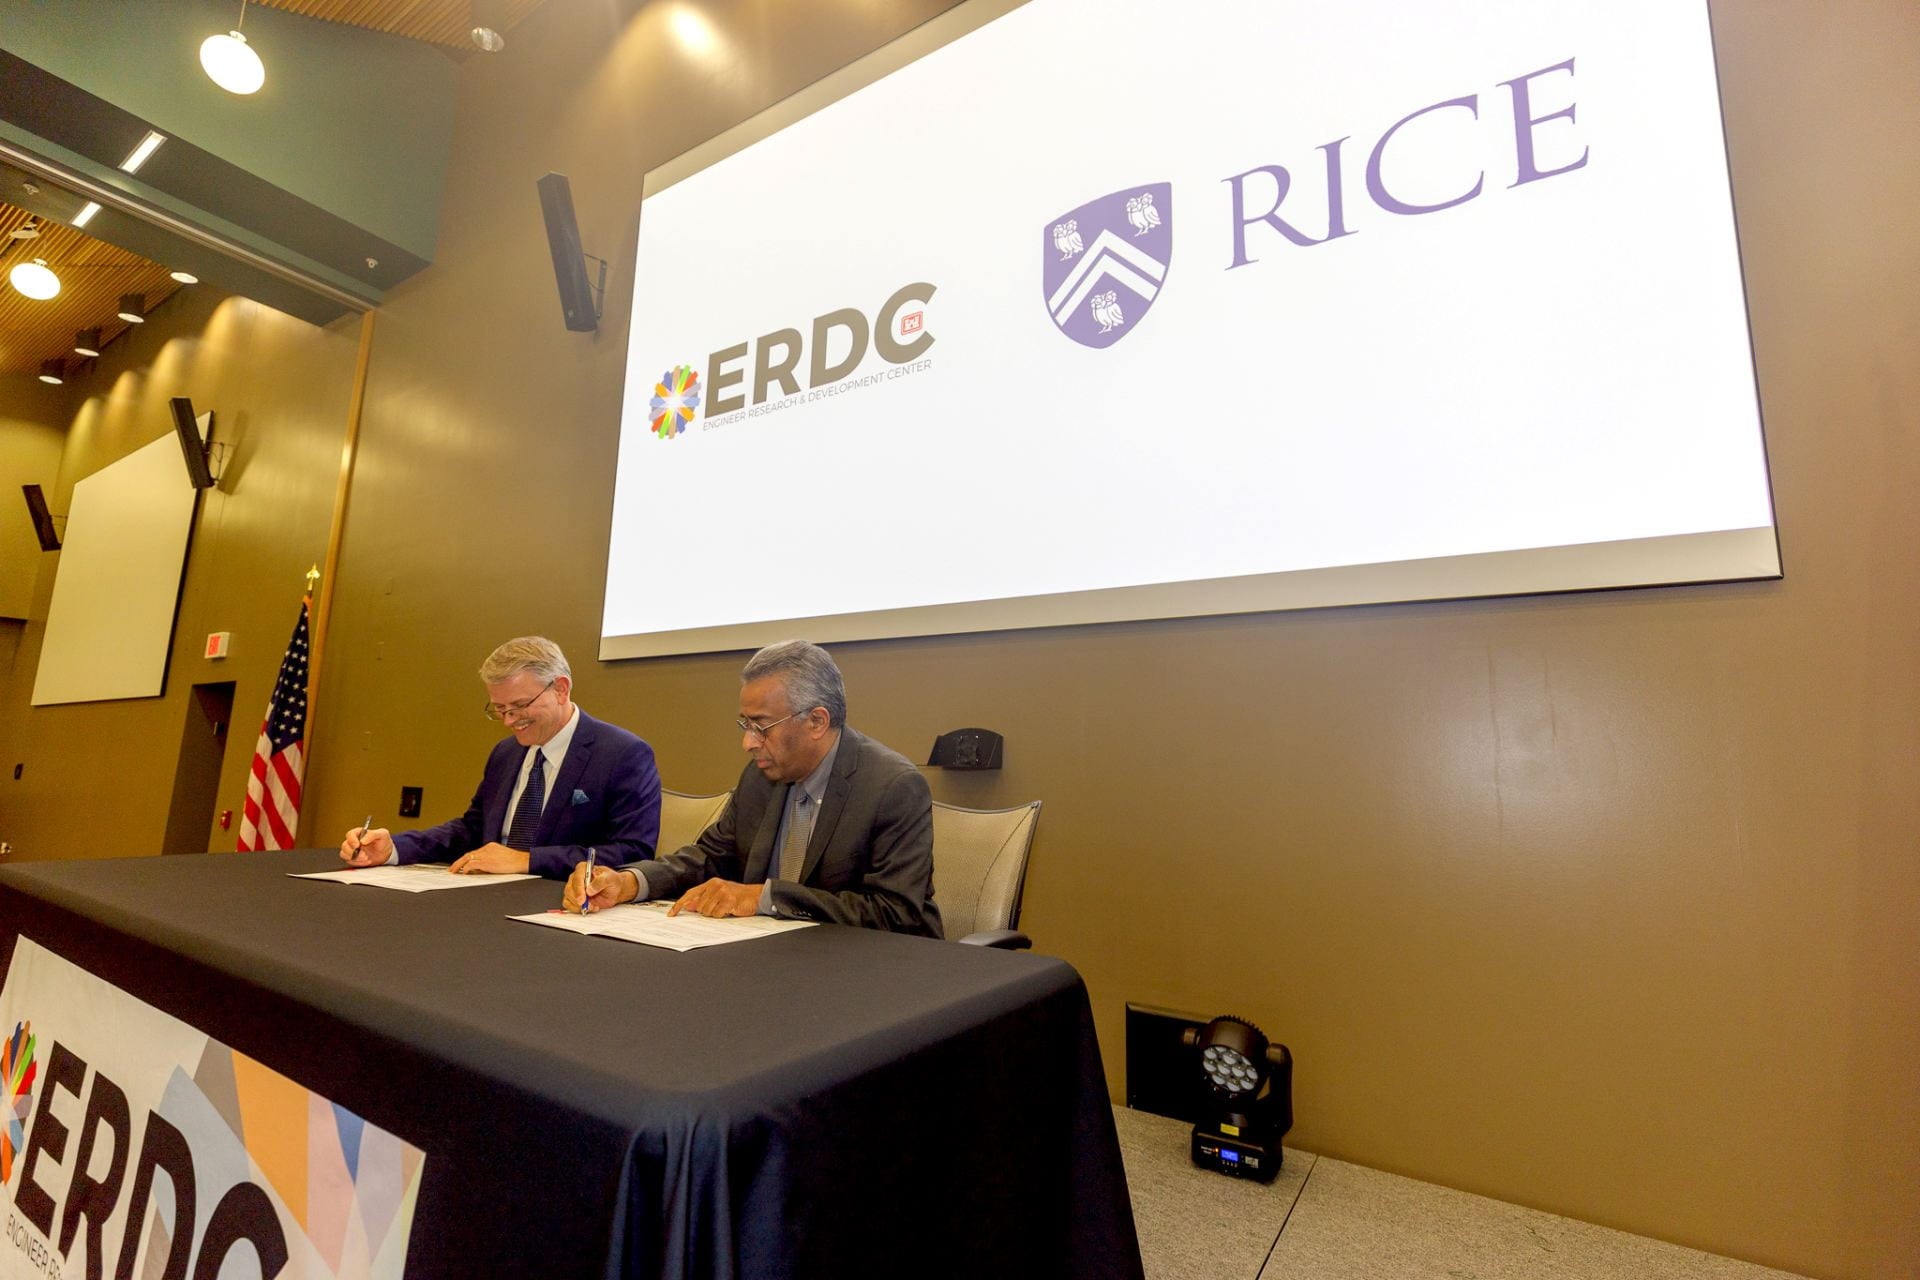 CAPTION: ERDC Director David Pittman (left) and Rice’s Executive Vice President for Research Ramamoorthy Ramesh signed an educational partnership agreement during a trip by Rice I-ACED students to the research and development facility headquartered in Vicksburg, Mississippi. (Credit: Khary Ratliff/ERDC)